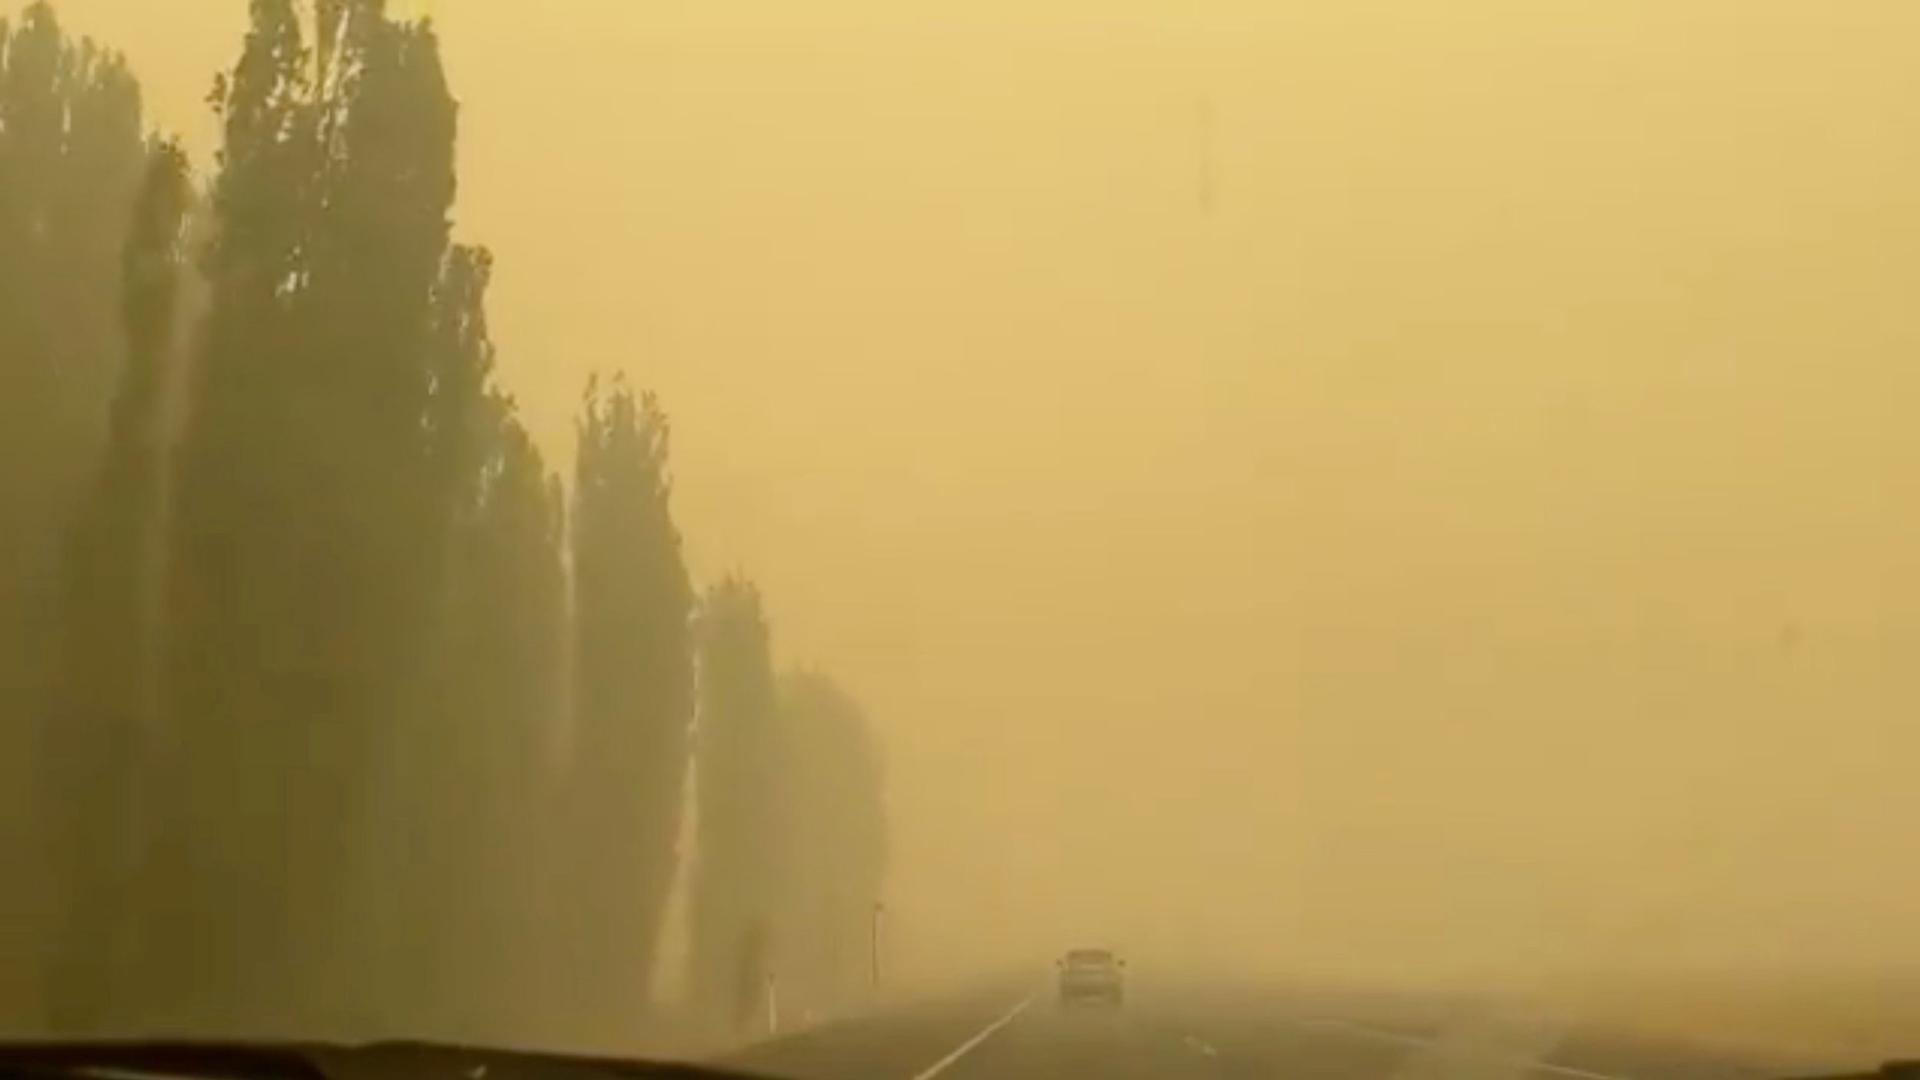 A car is shown in the distance driving on a road and entirely surrounded by dark yellow smoke.